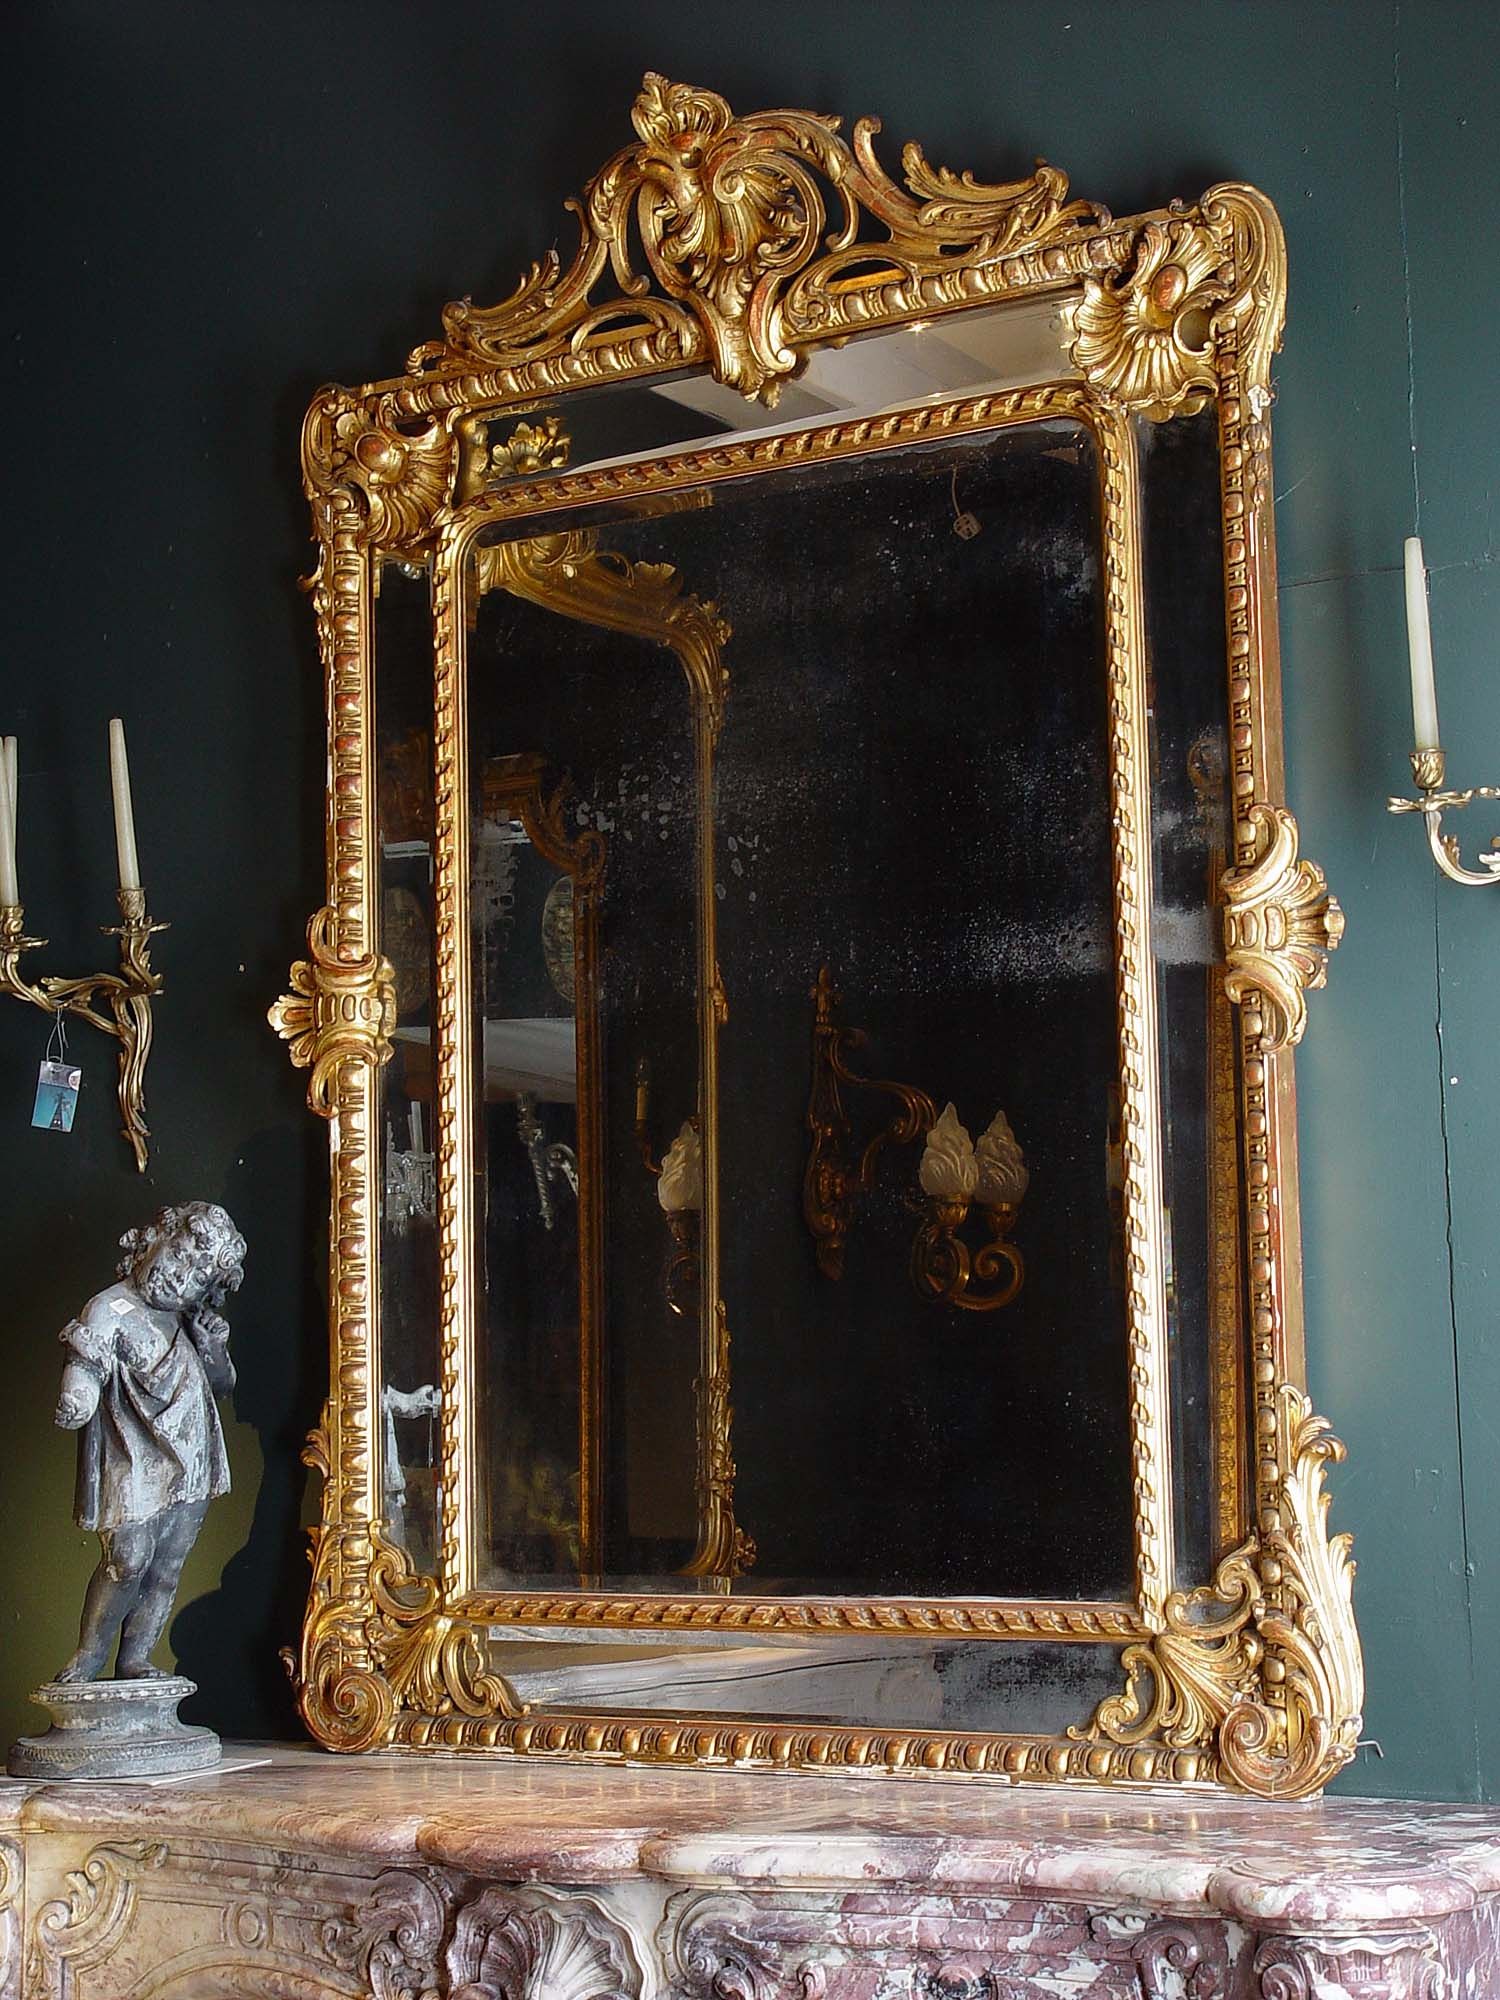 Big Mirrors For Sale 38 Cool Ideas For Mirror Harpsoundsco With Regard To Old Mirrors For Sale (View 7 of 15)